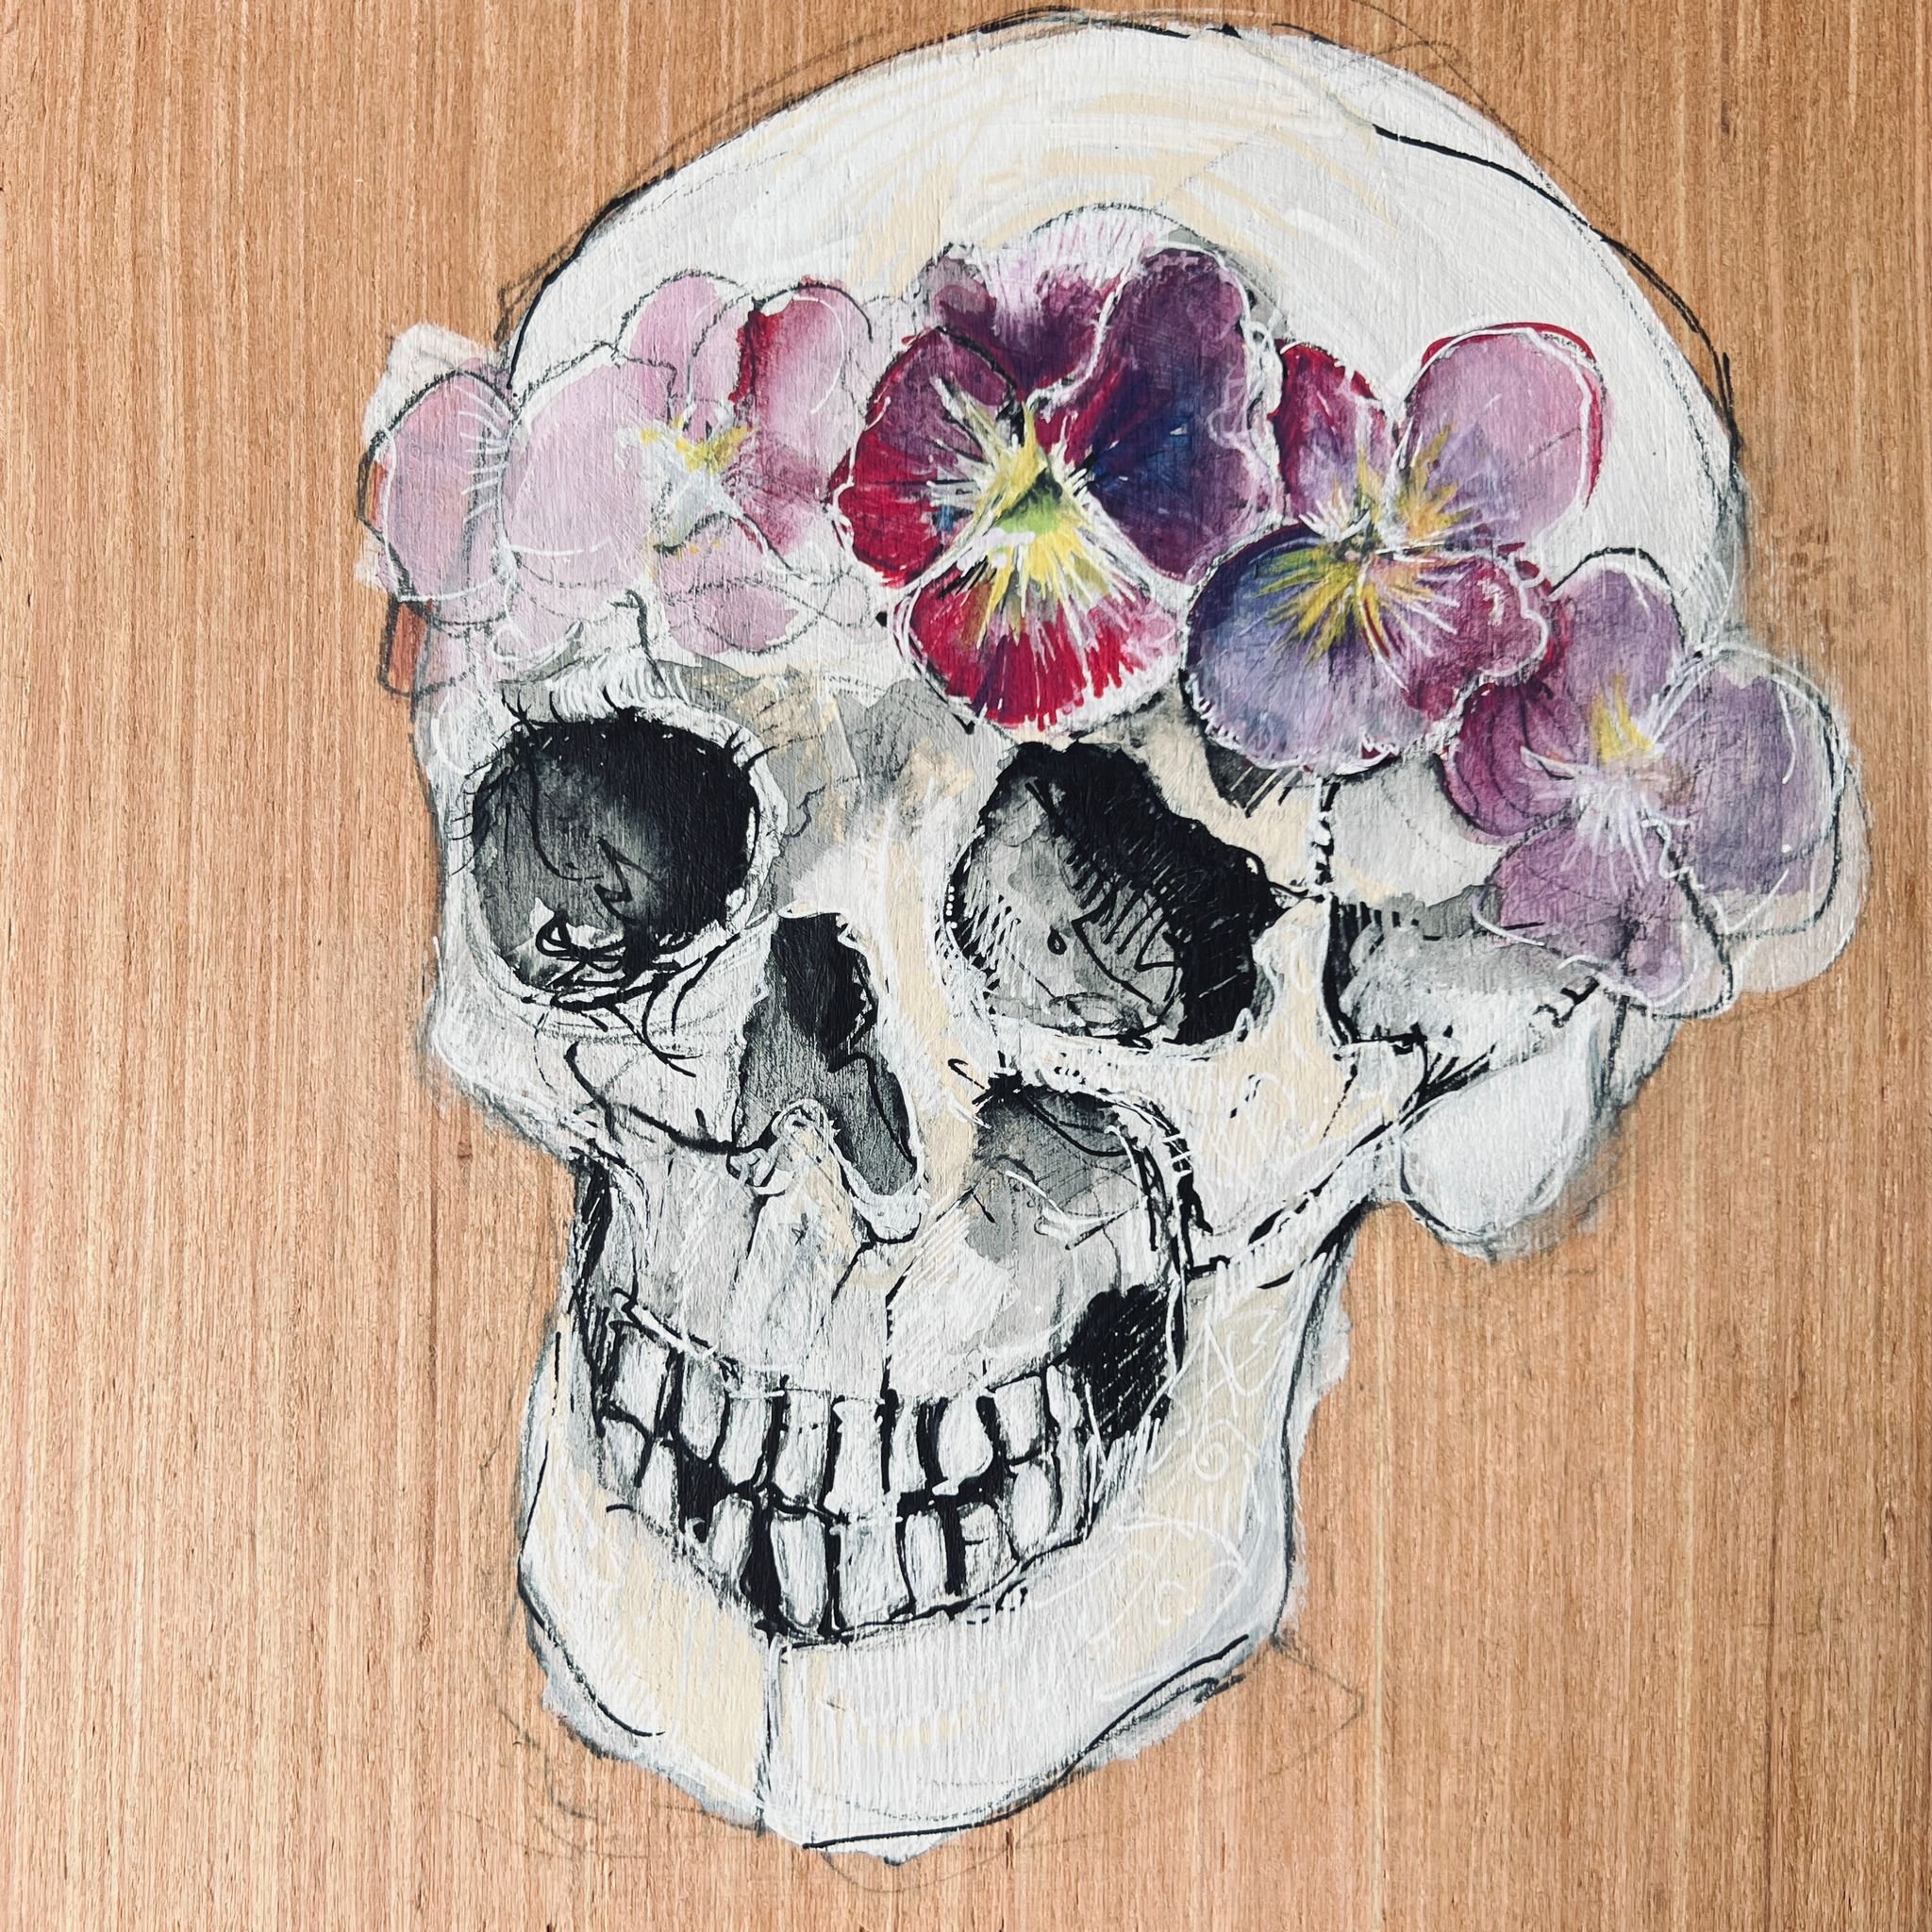 Skull with violets headband  - identity Drawing on plywood 